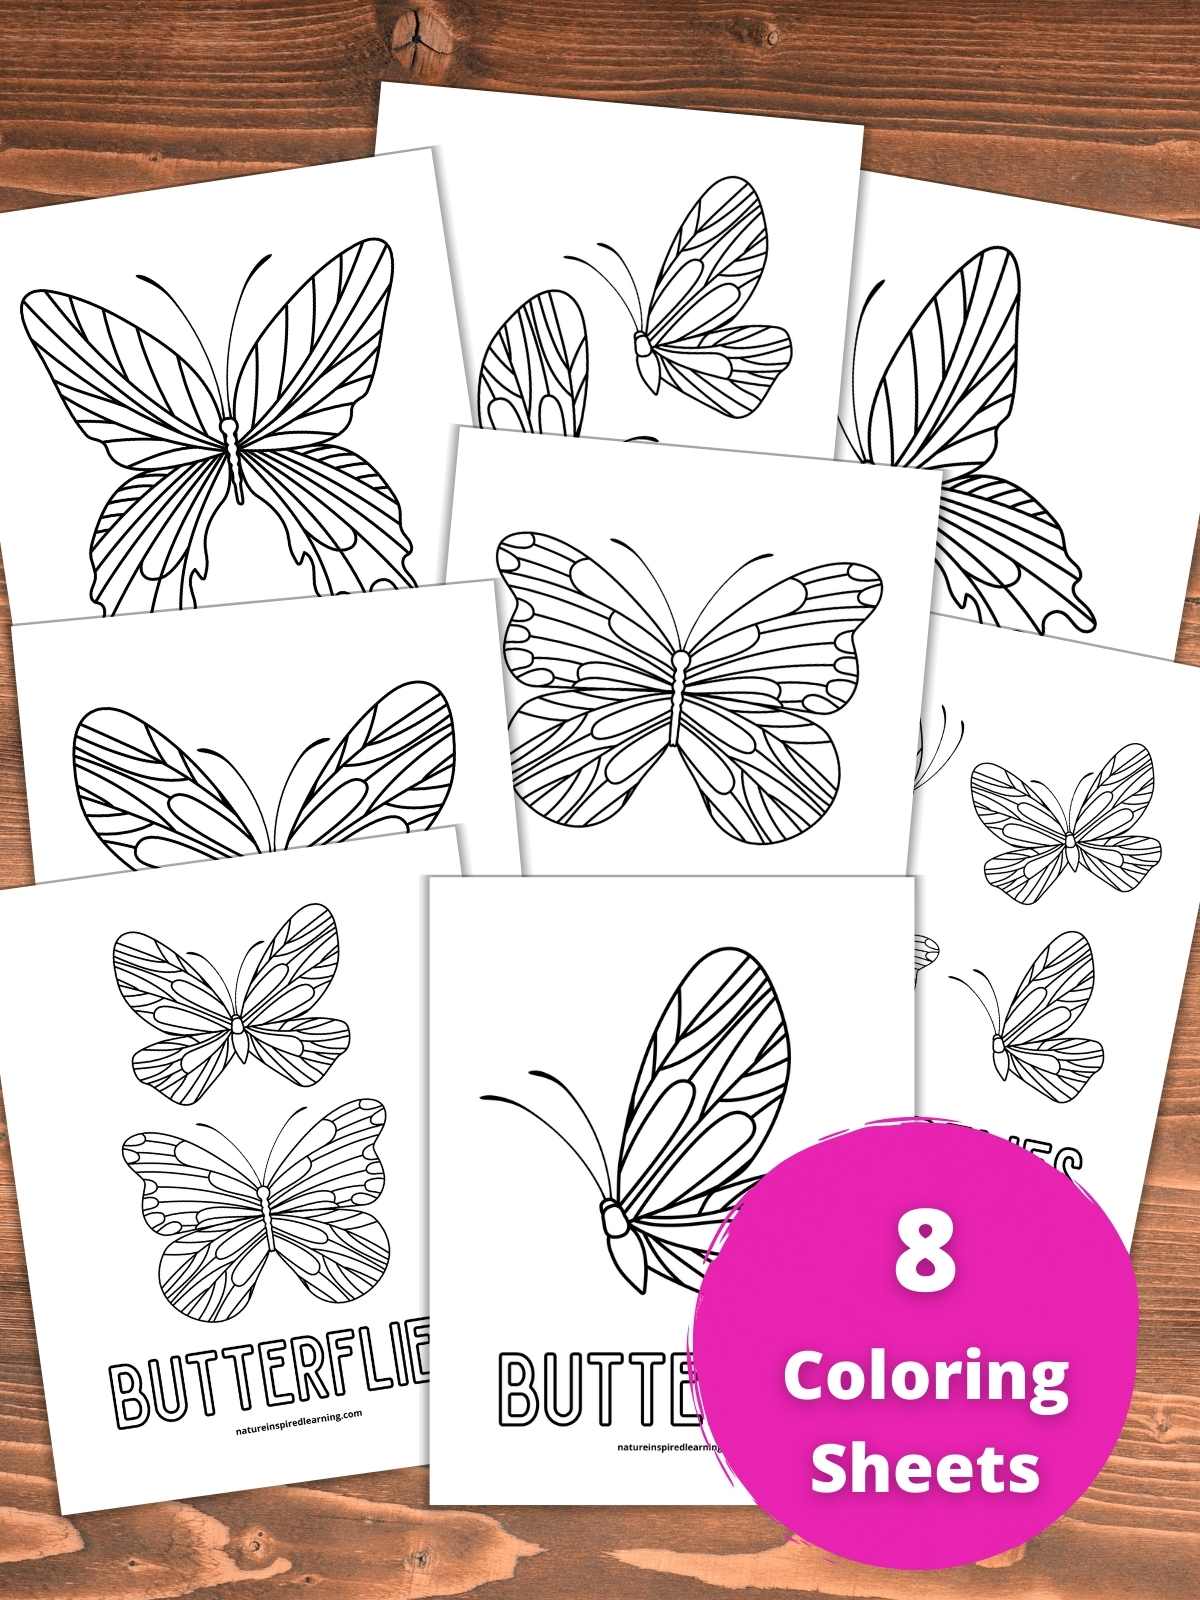 collection of printed off butterfly coloring sheets overlapping each other on a wooden background and a bright magenta circle bottom right with text overlay